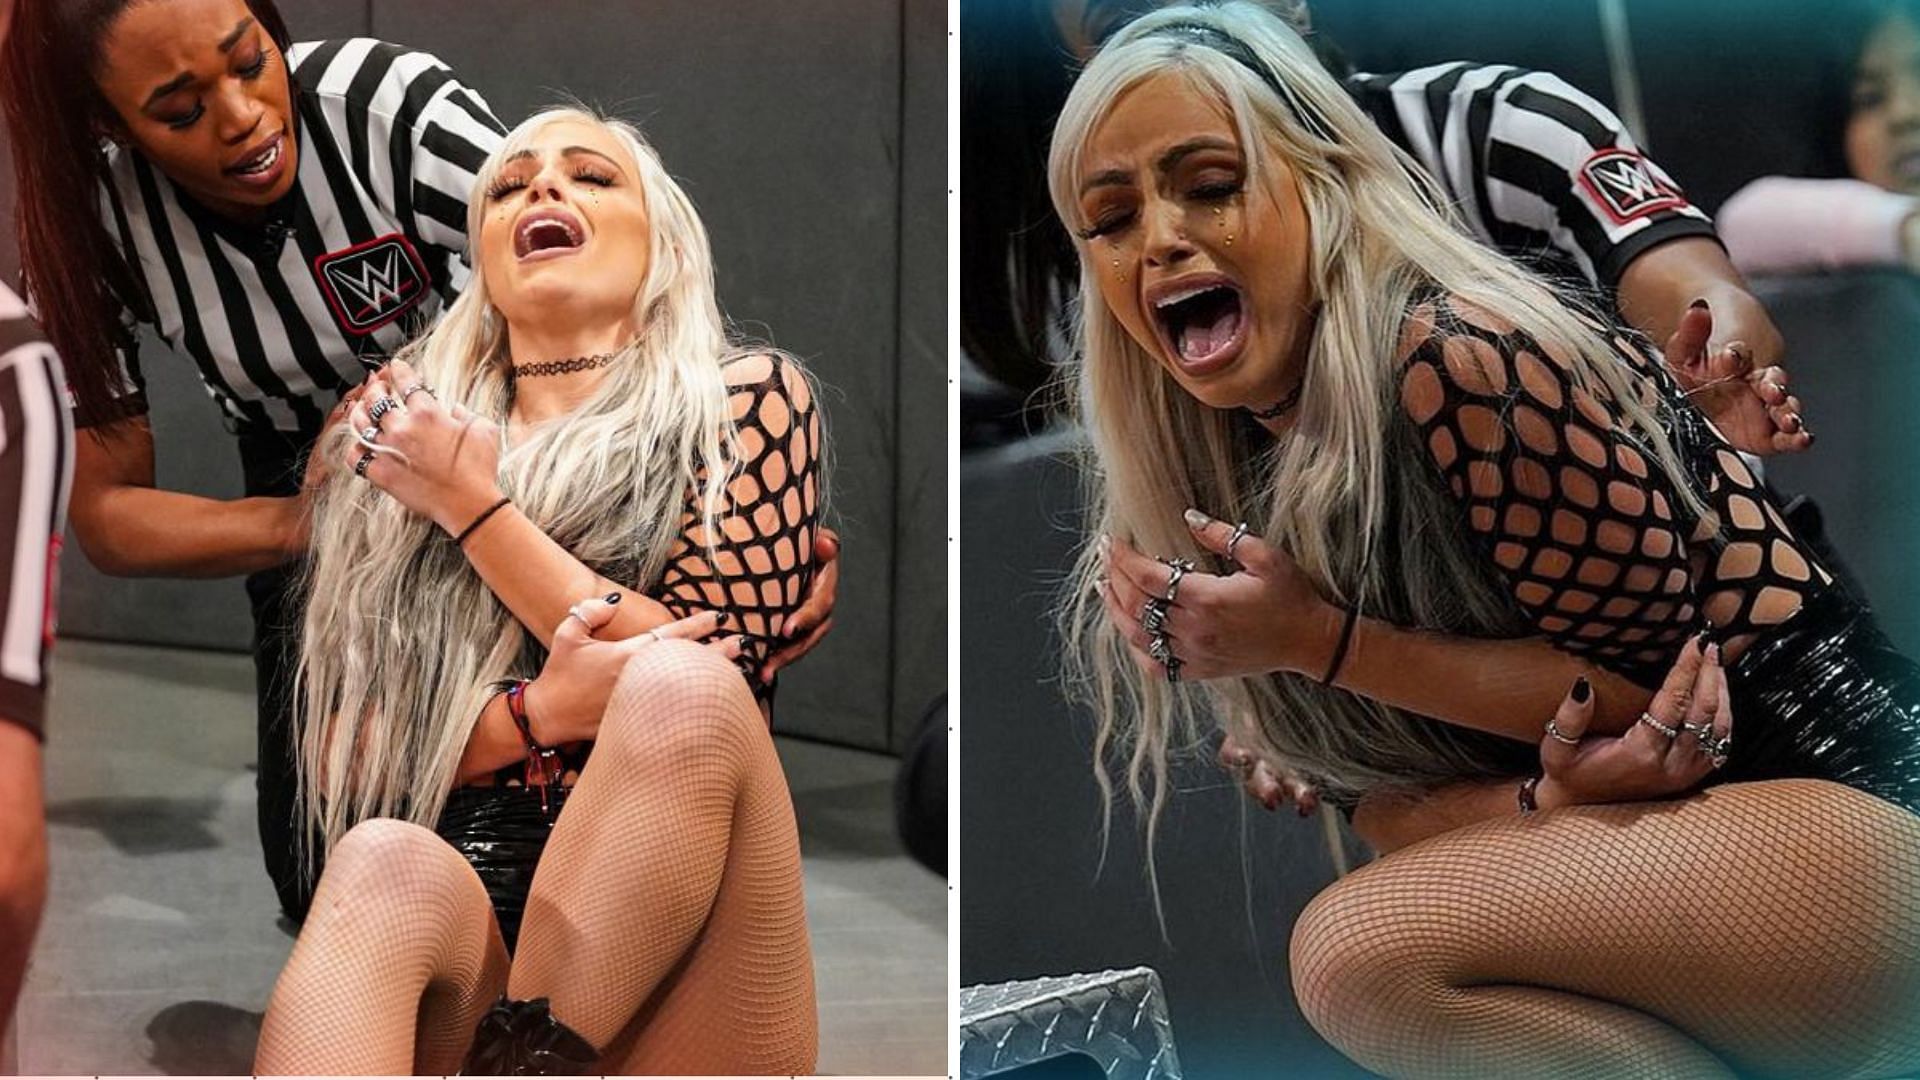 Liv Morgan has been more vicious in recent weeks